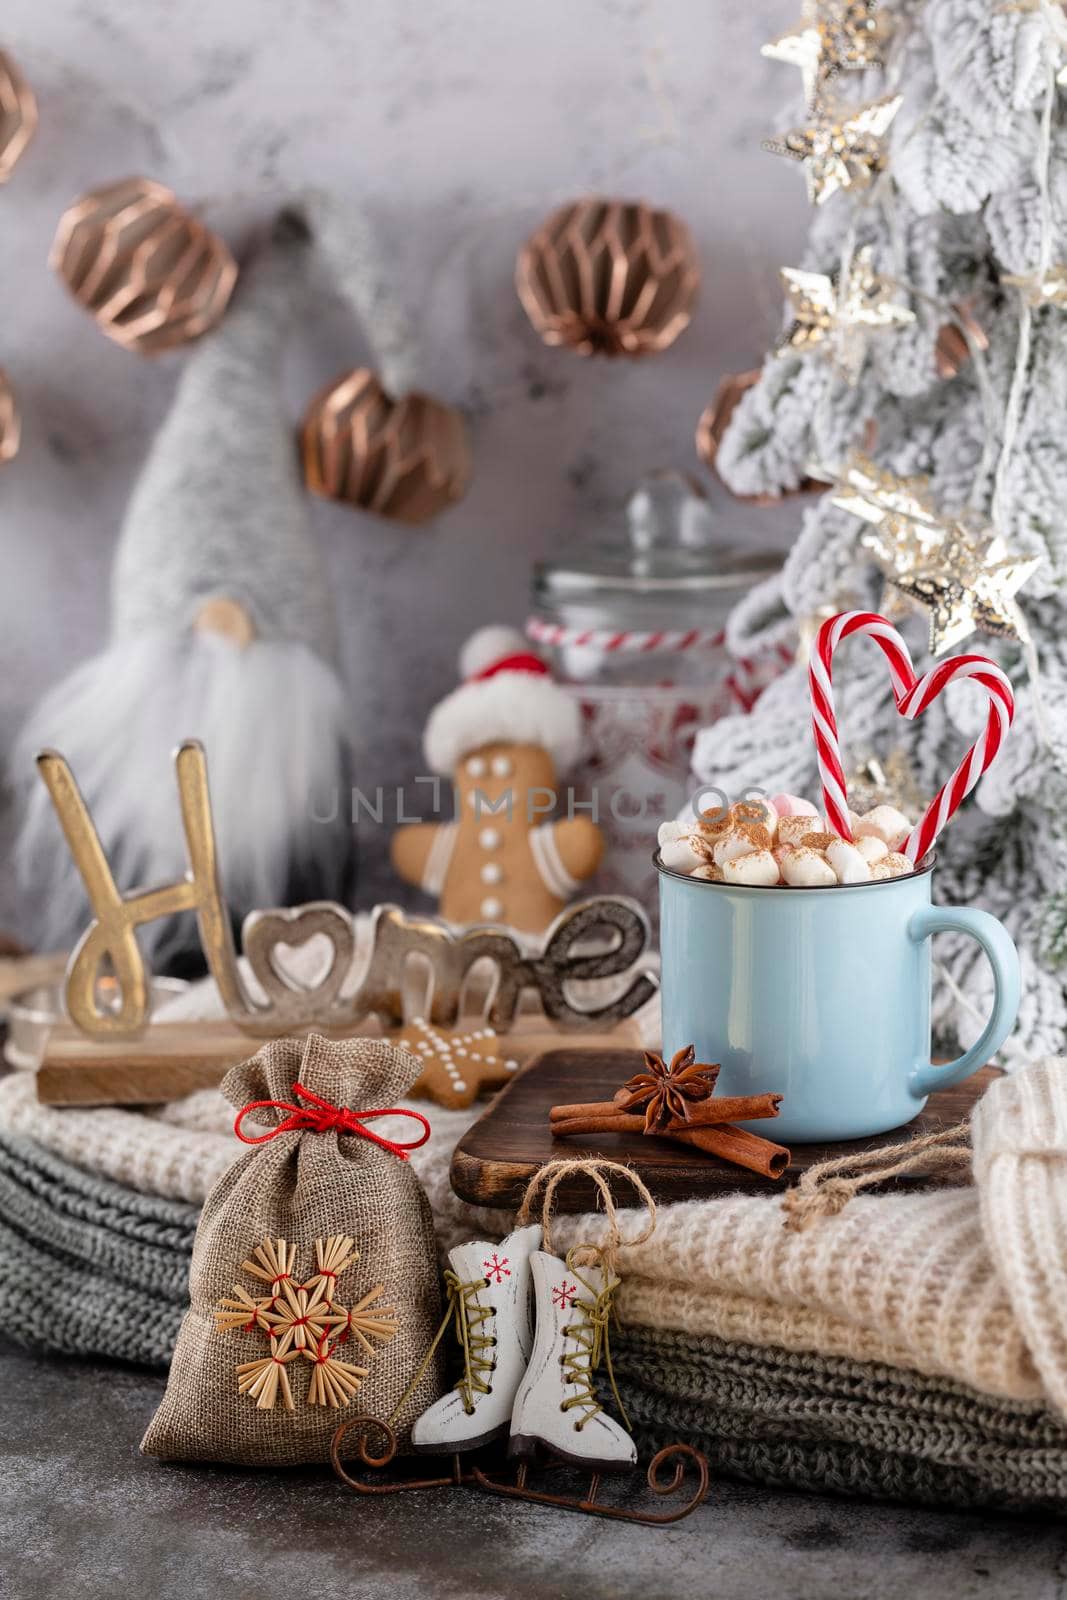 Gingerbread with mug of hot chocolate and candy cane. by gitusik